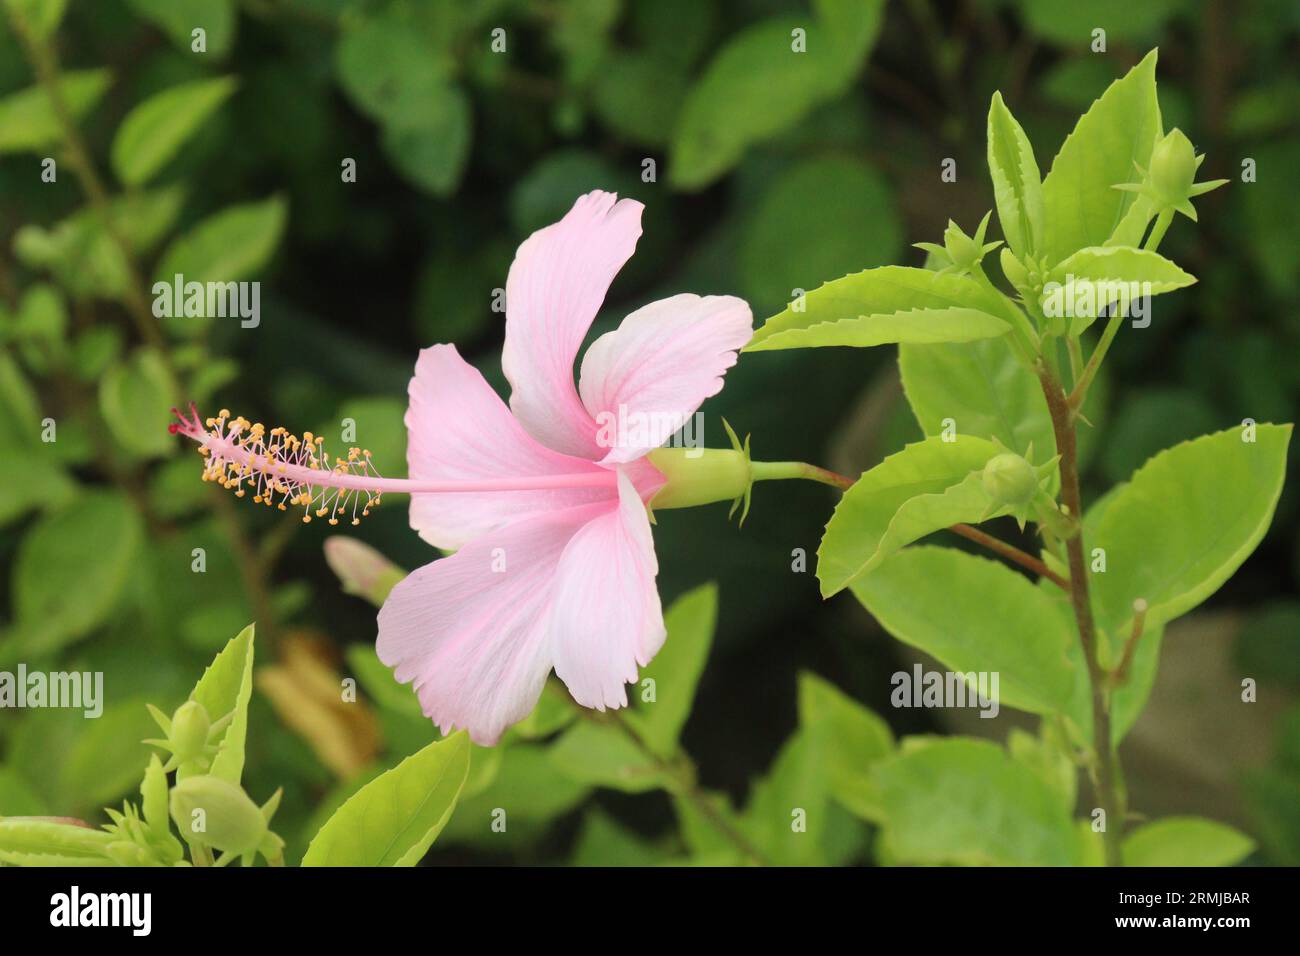 pink colored shoeblackplant flower on garden for harvest are cash crops Stock Photo